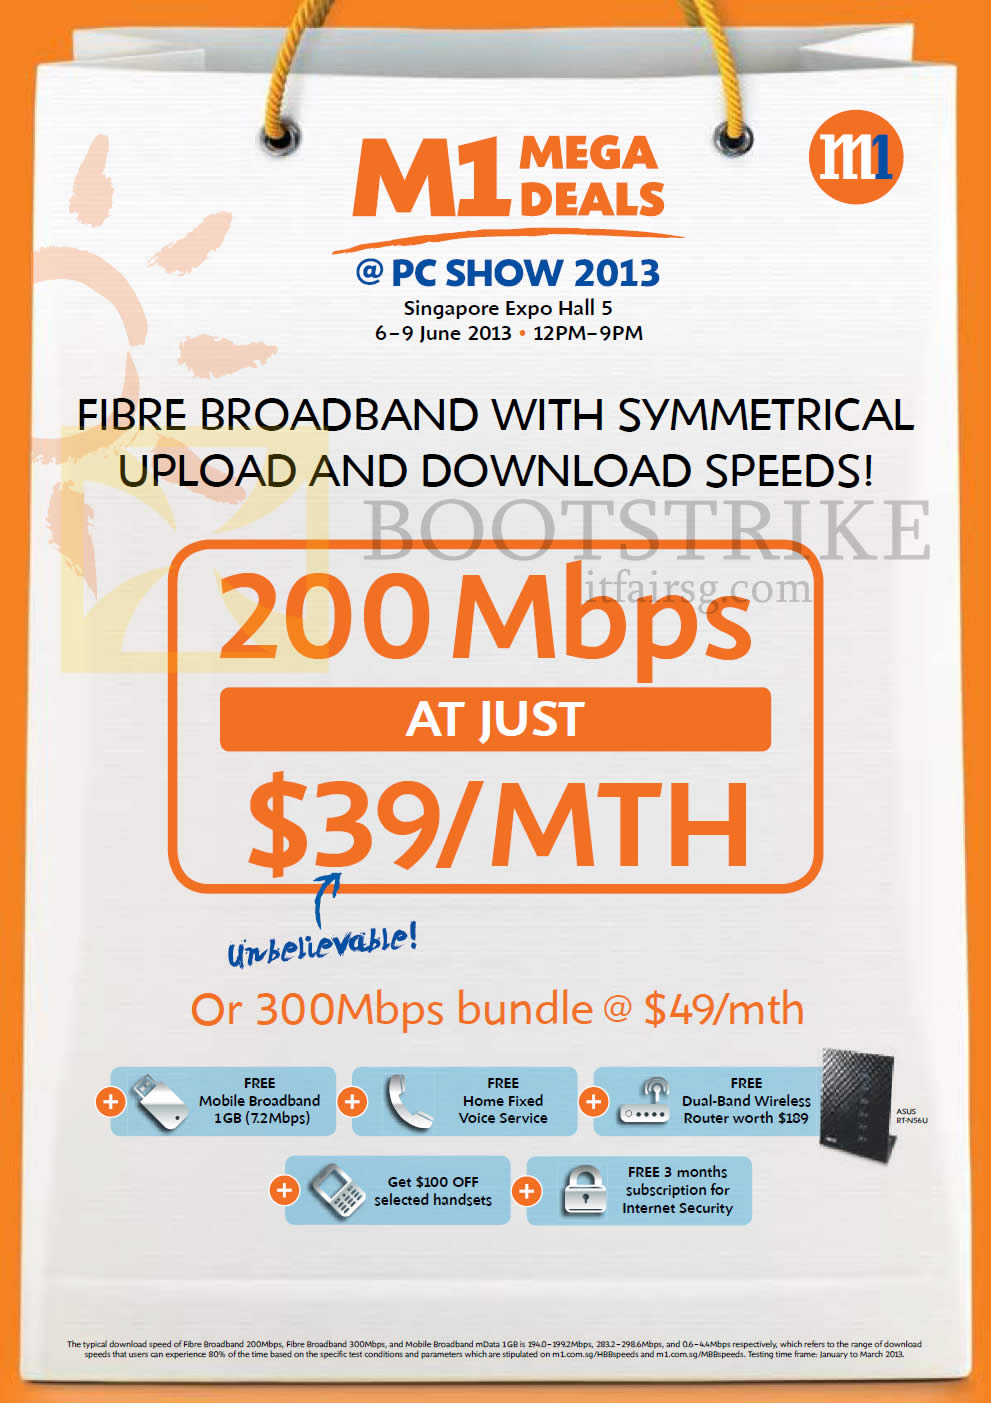 PC SHOW 2013 price list image brochure of M1 Broadband Fibre 39.00 200Mbps, 300Mbps 49.00, Mobile Broadband, Fixed Line, Router, Internet Security